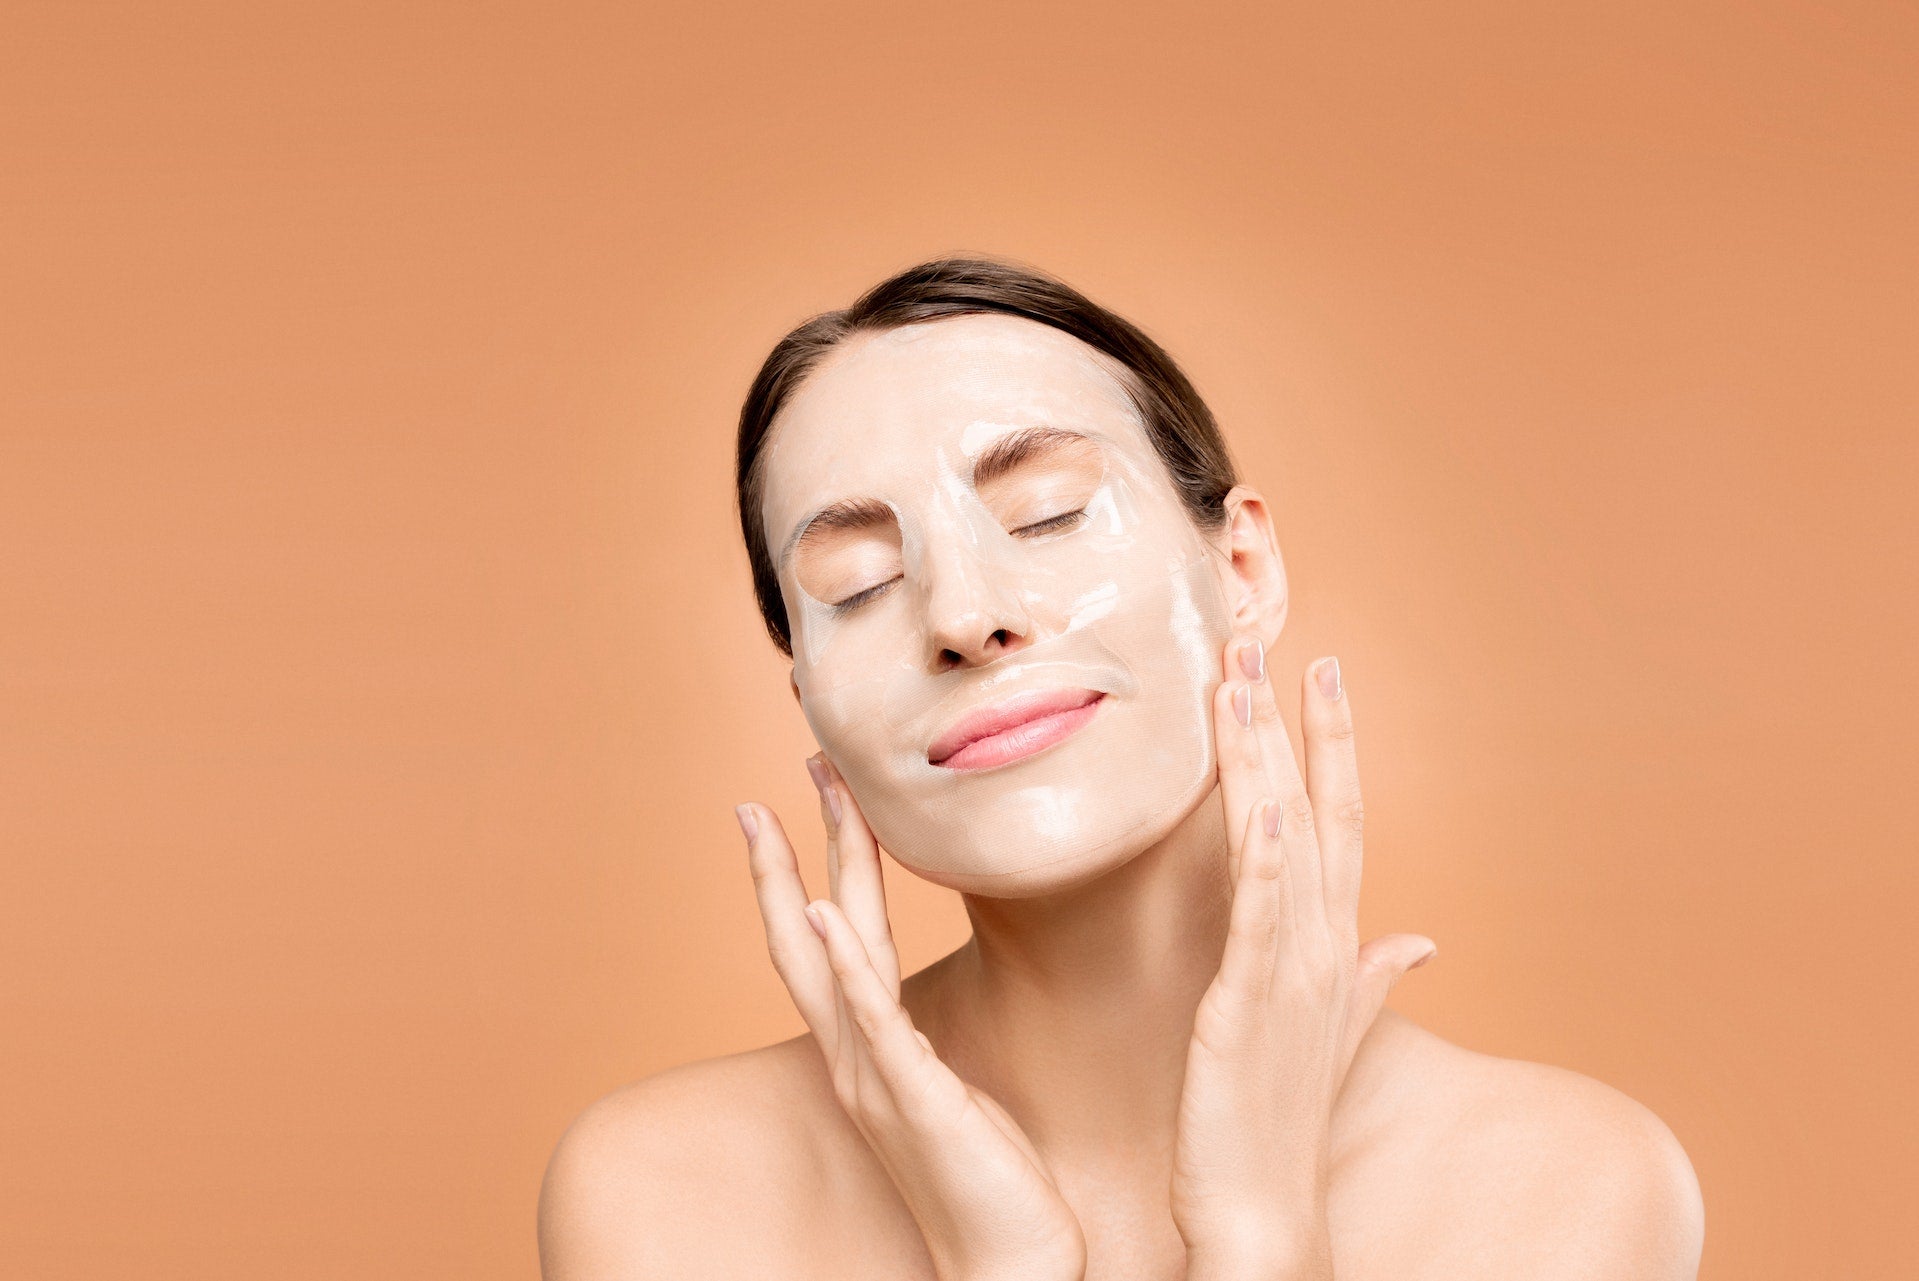 Top 10 Most Important Ways to Take Care of Your Skin